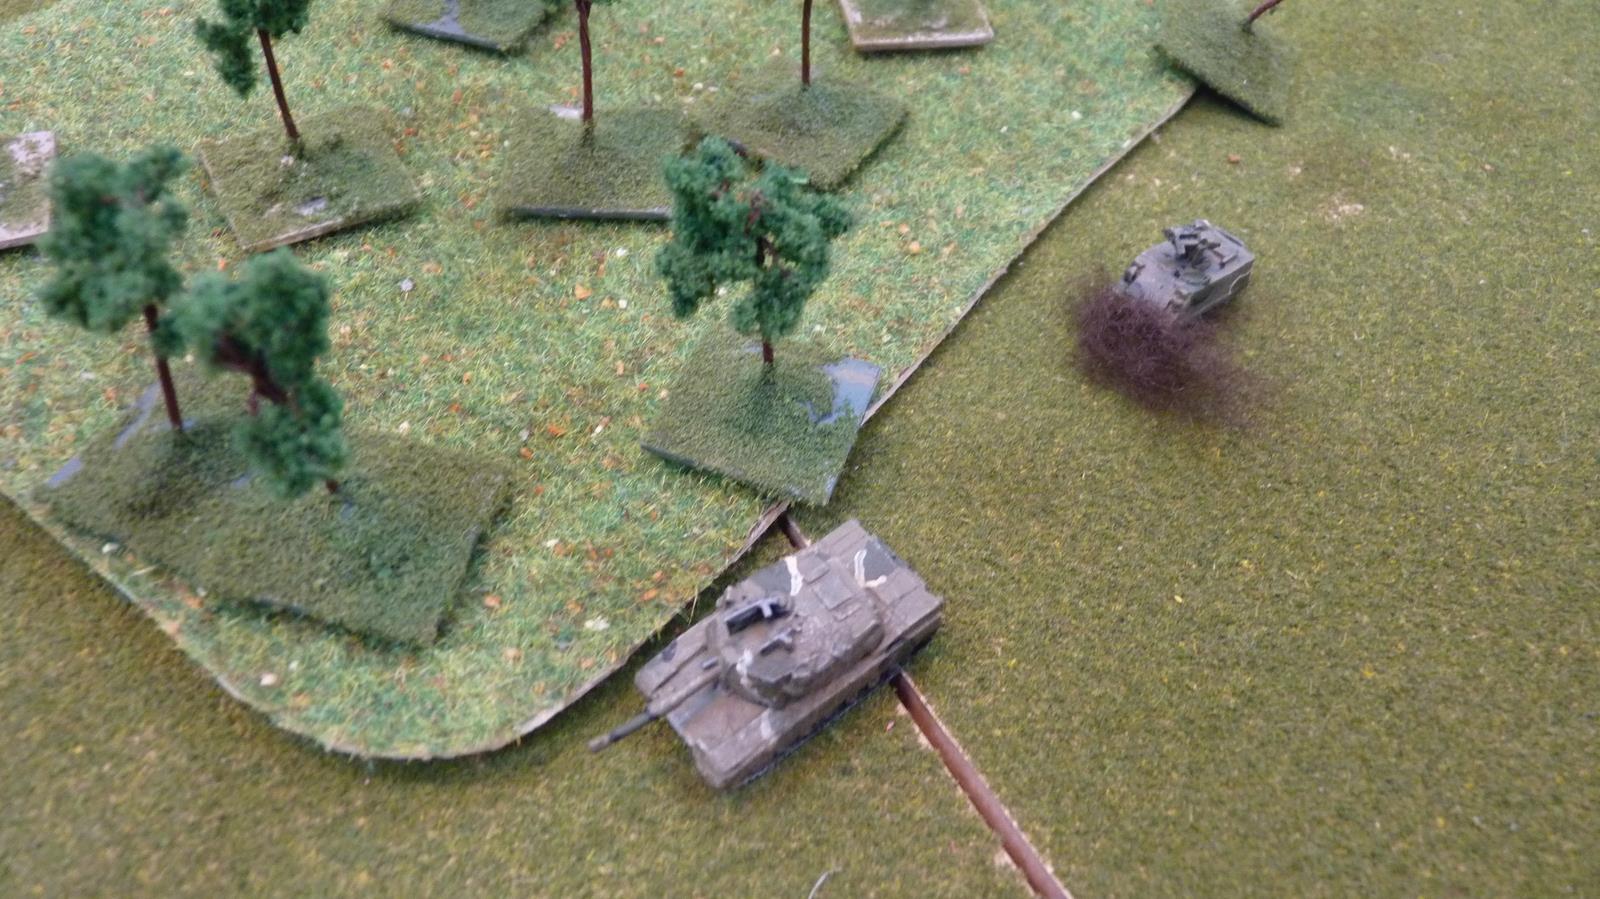 The last Abrams retreats to a new firing position